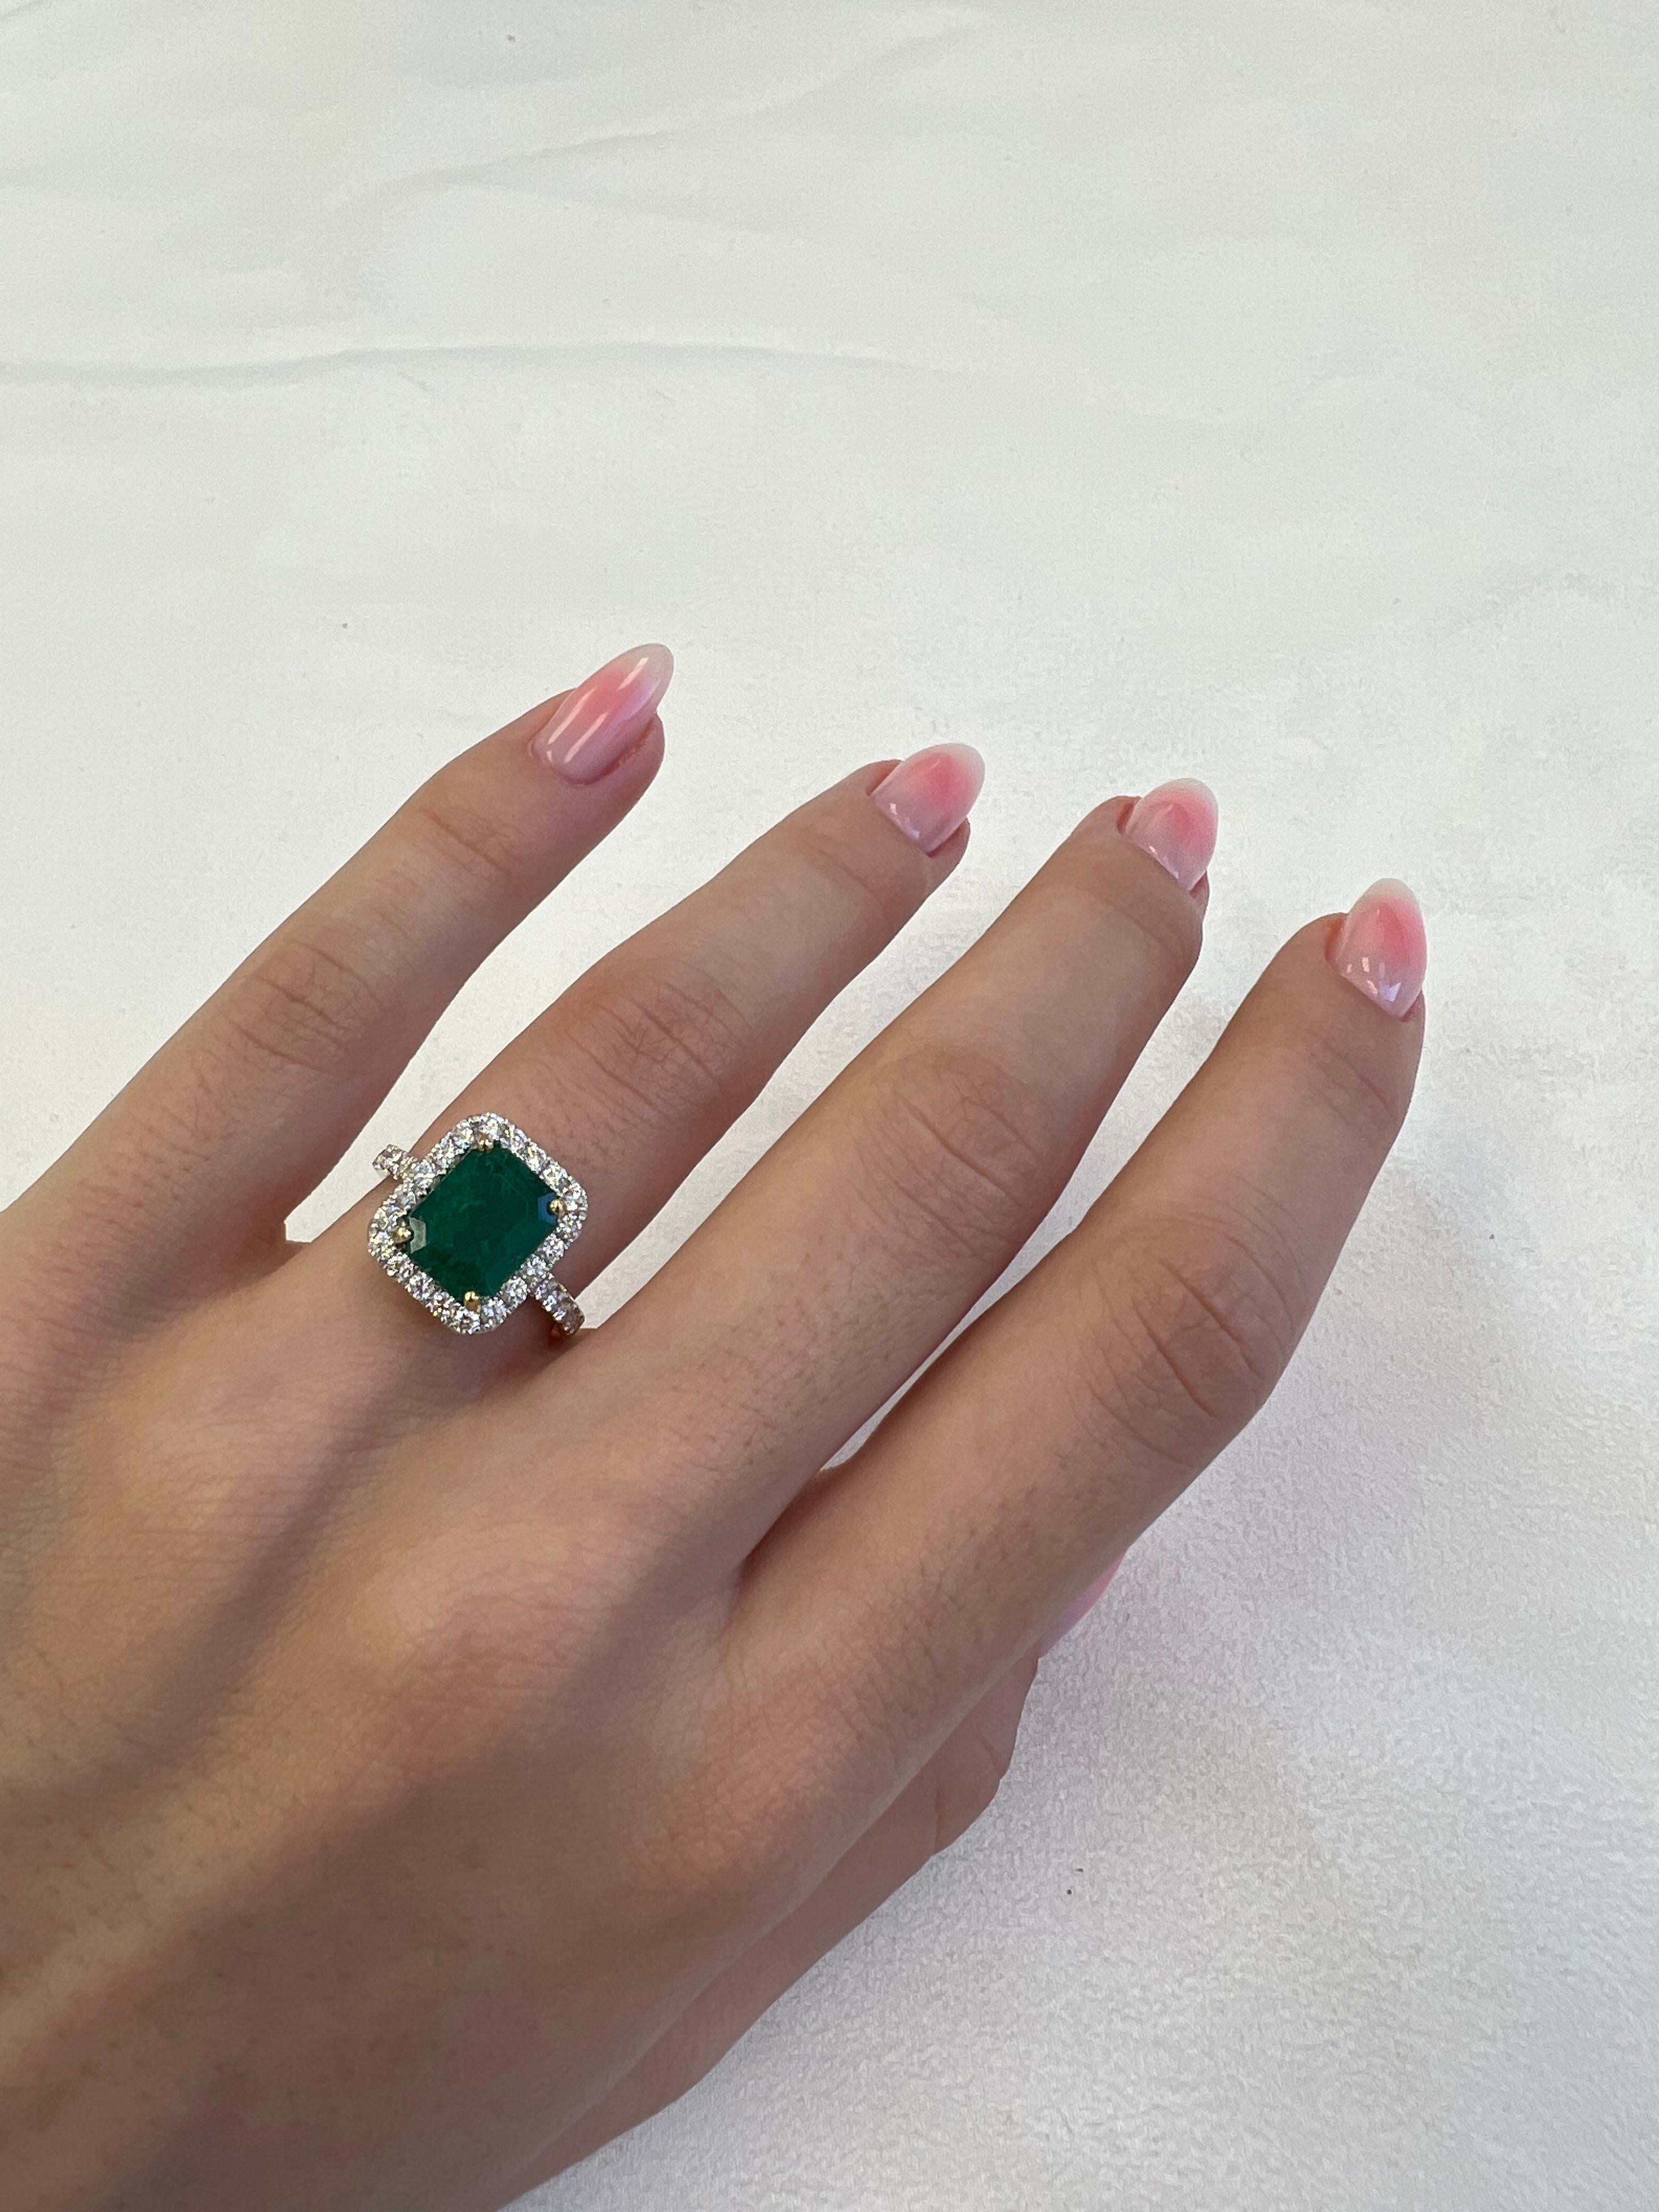 Classic emerald and diamond halo ring, GIA certified. 
3.49 carats total gemstone weight.
2.64 carat emerald cut emerald, F2, GIA certified. Complimented by 32 round brilliant diamonds, 0.85 carats, F/G color and VS clarity. 18k white and yellow